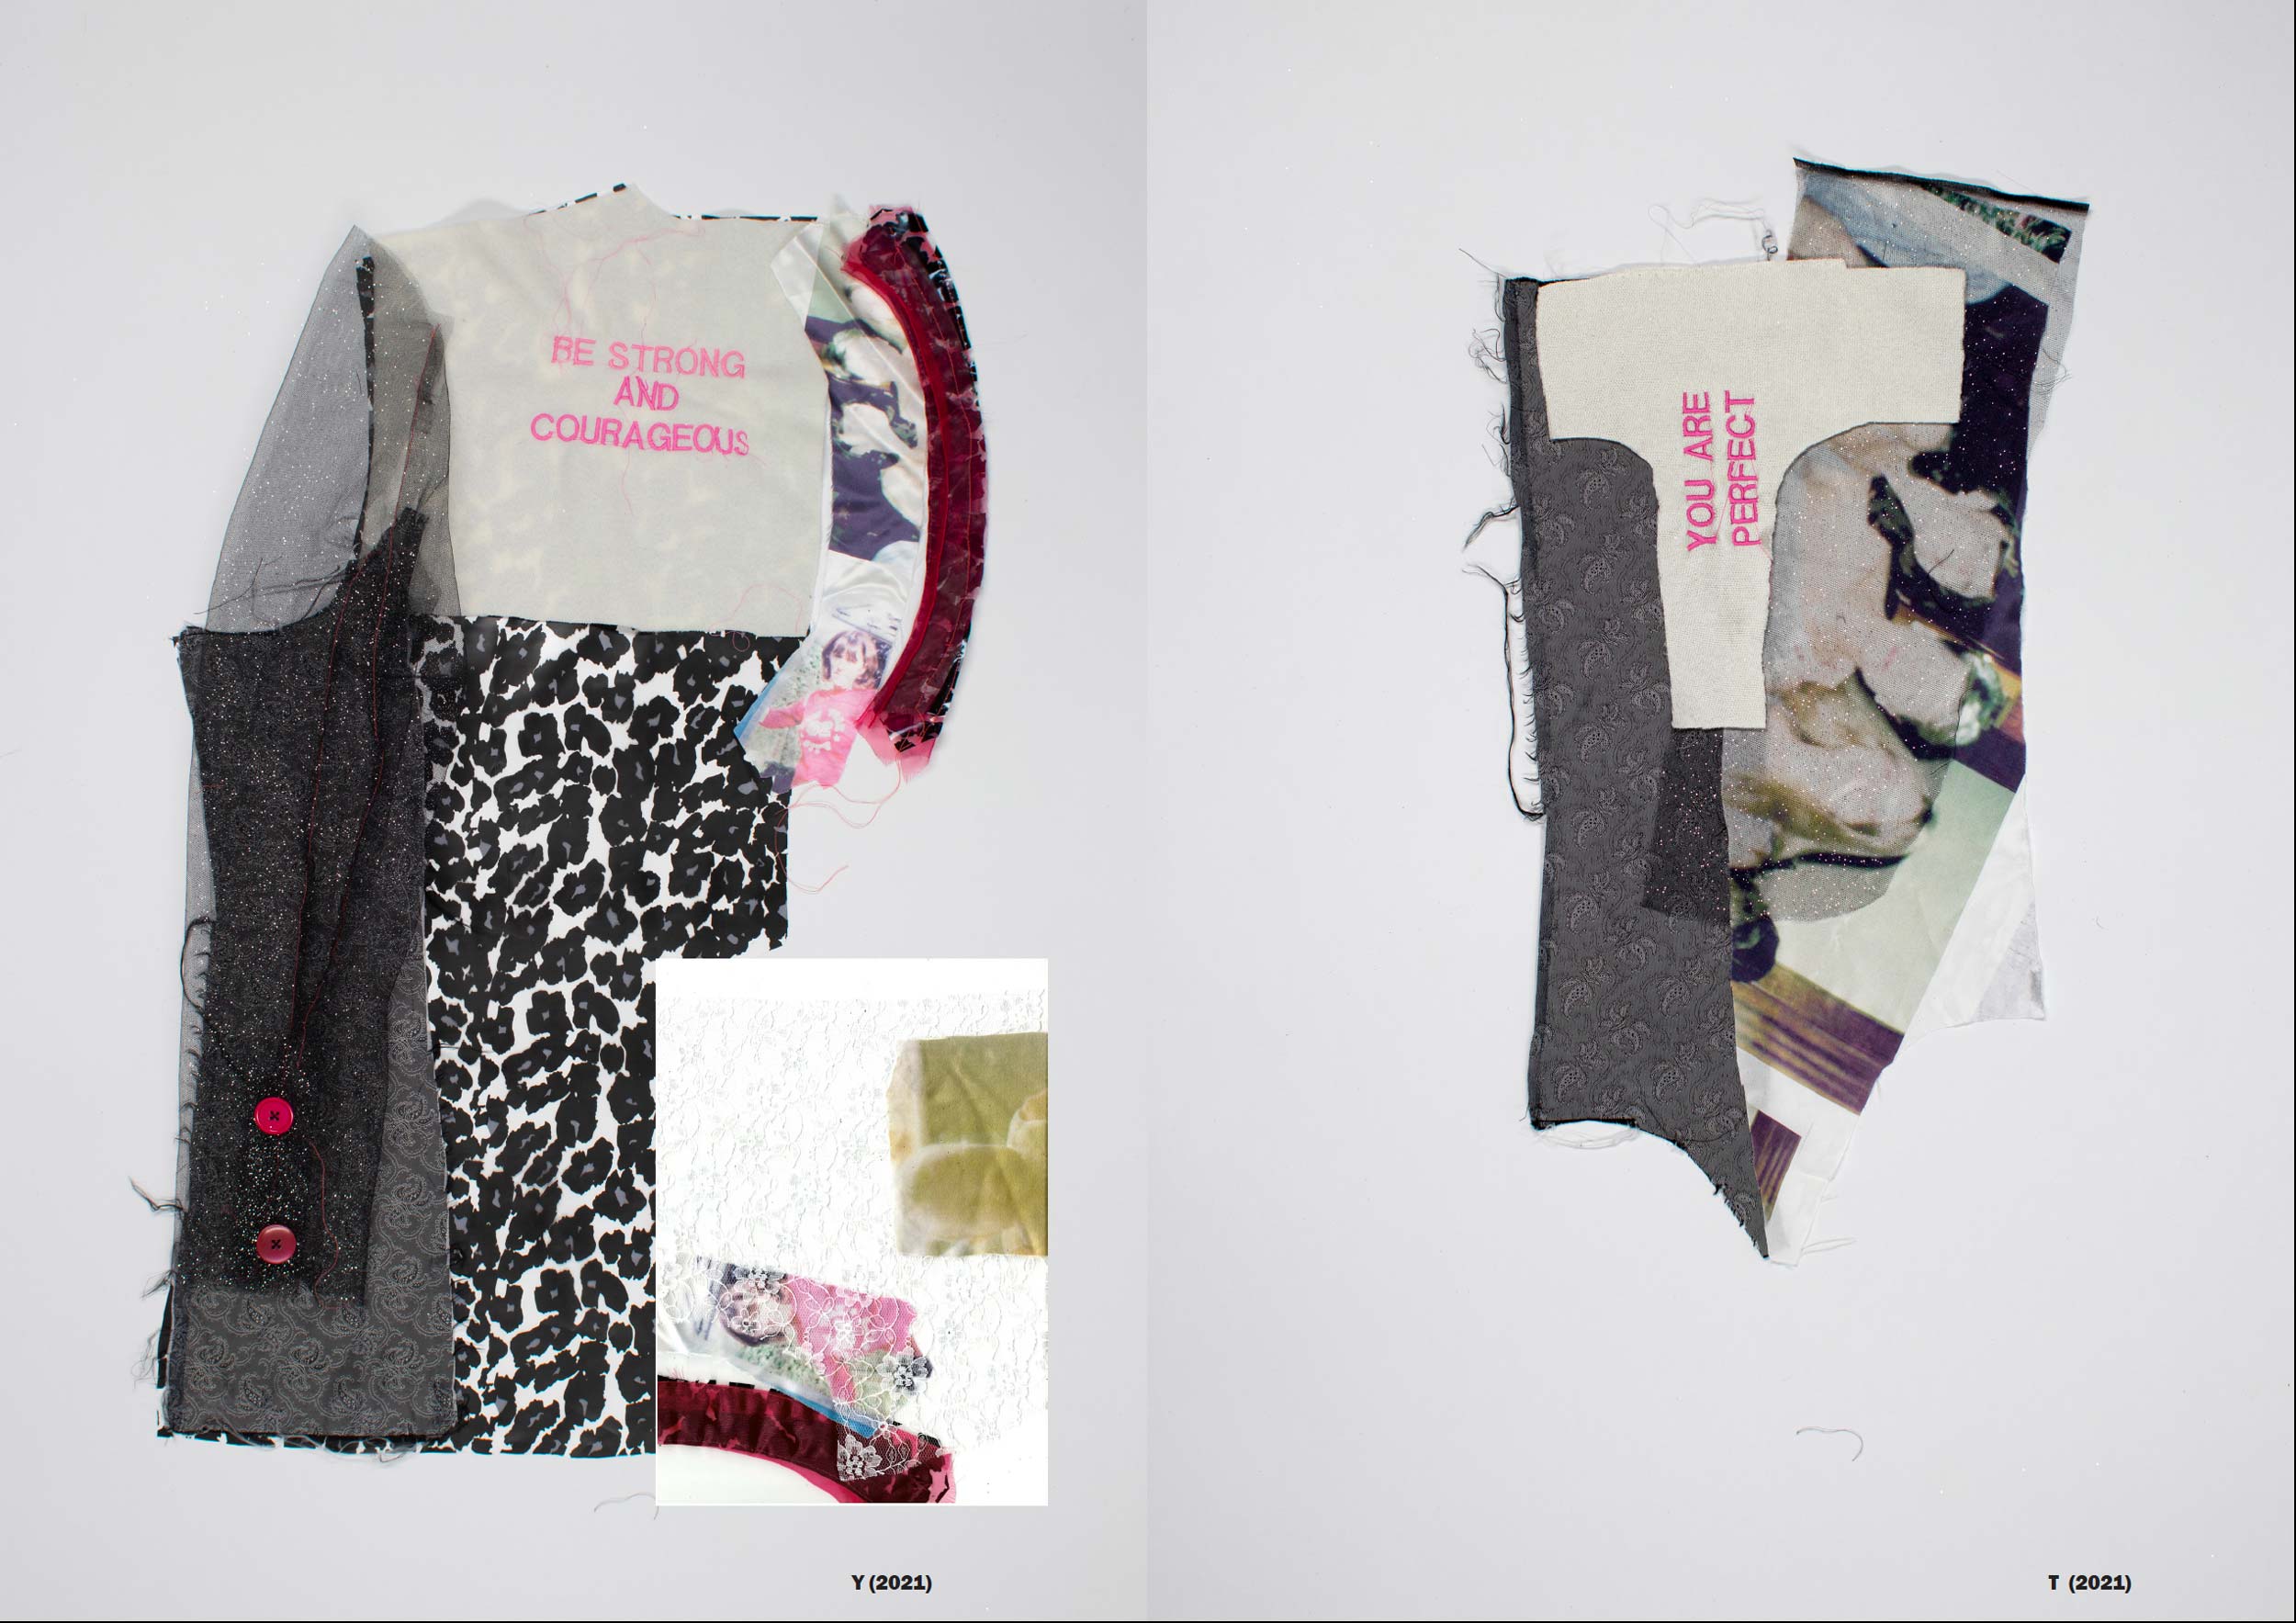 A colour photograph showing two fabric collages on a white background. The collage on the right shows parts of a mens blazer that have been deconstructed. The fabric is in pieces and layered onto of one and other. A leopard print fabric replaces the body. The words 'Be Strong and Couragous' are written in pink on a white piece of fabric. In the fabric collage on the right the words 'you are perfect' are stitched in pink and written on off-white fabric. A photograph pf three women is printed onto fabric and layered underneath alongside other elements of a deconstructed mens blazer.